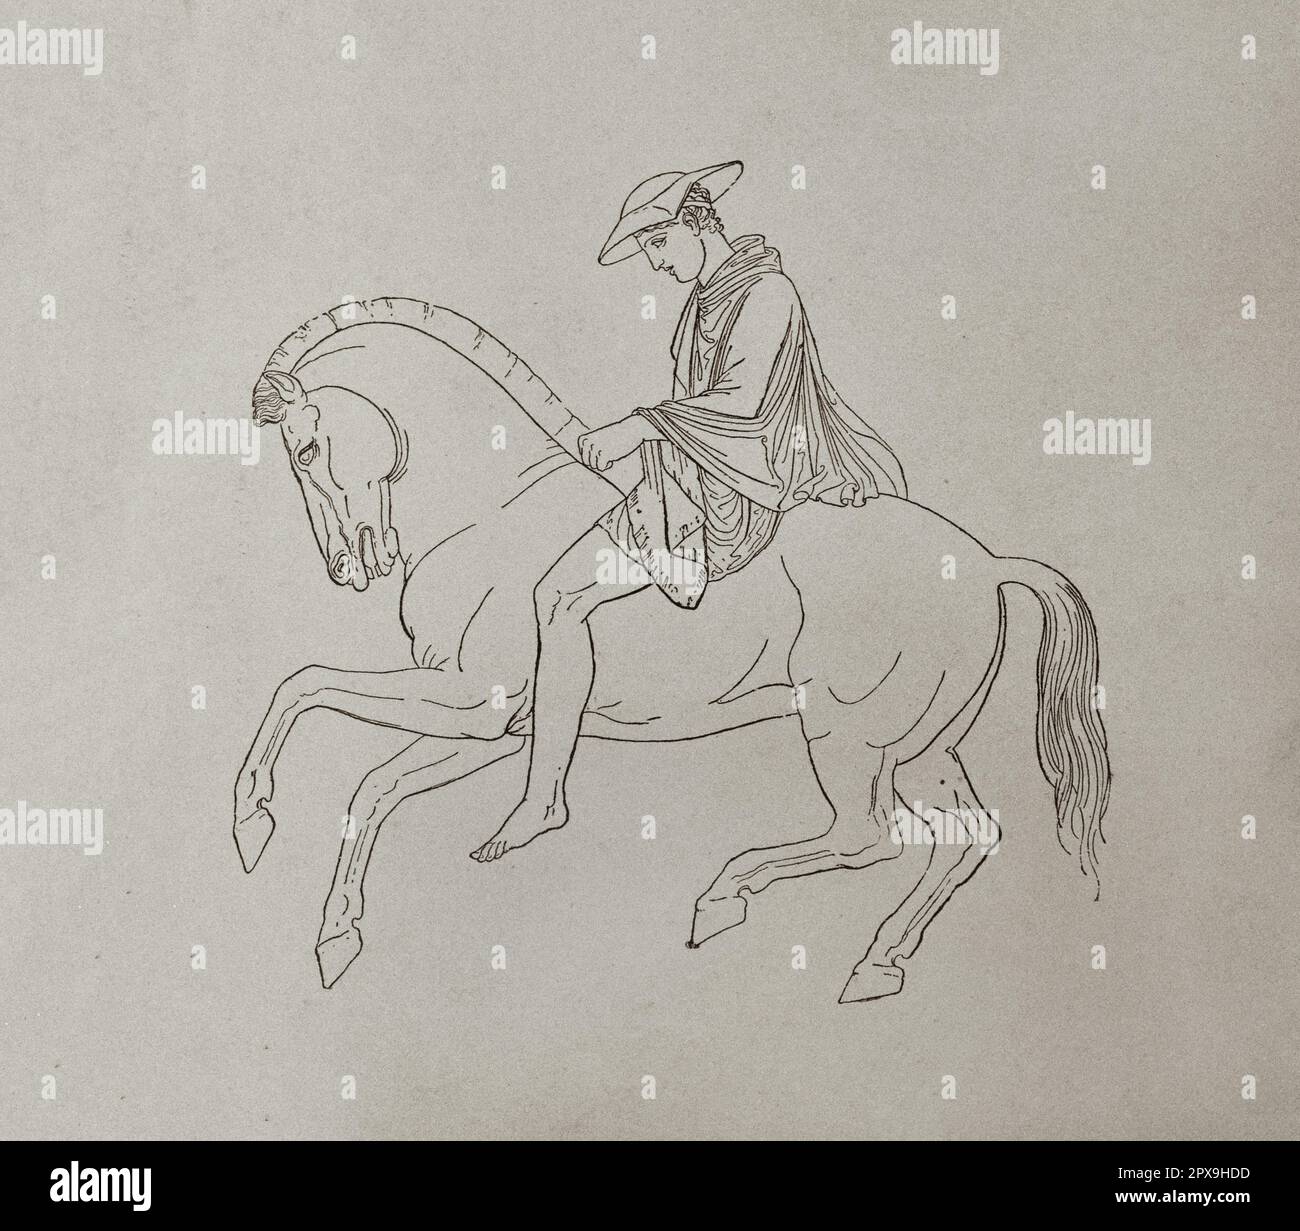 Vintage illustration of horse riding Hellenic. (Drawing from the frieze of the Parthenon) Stock Photo